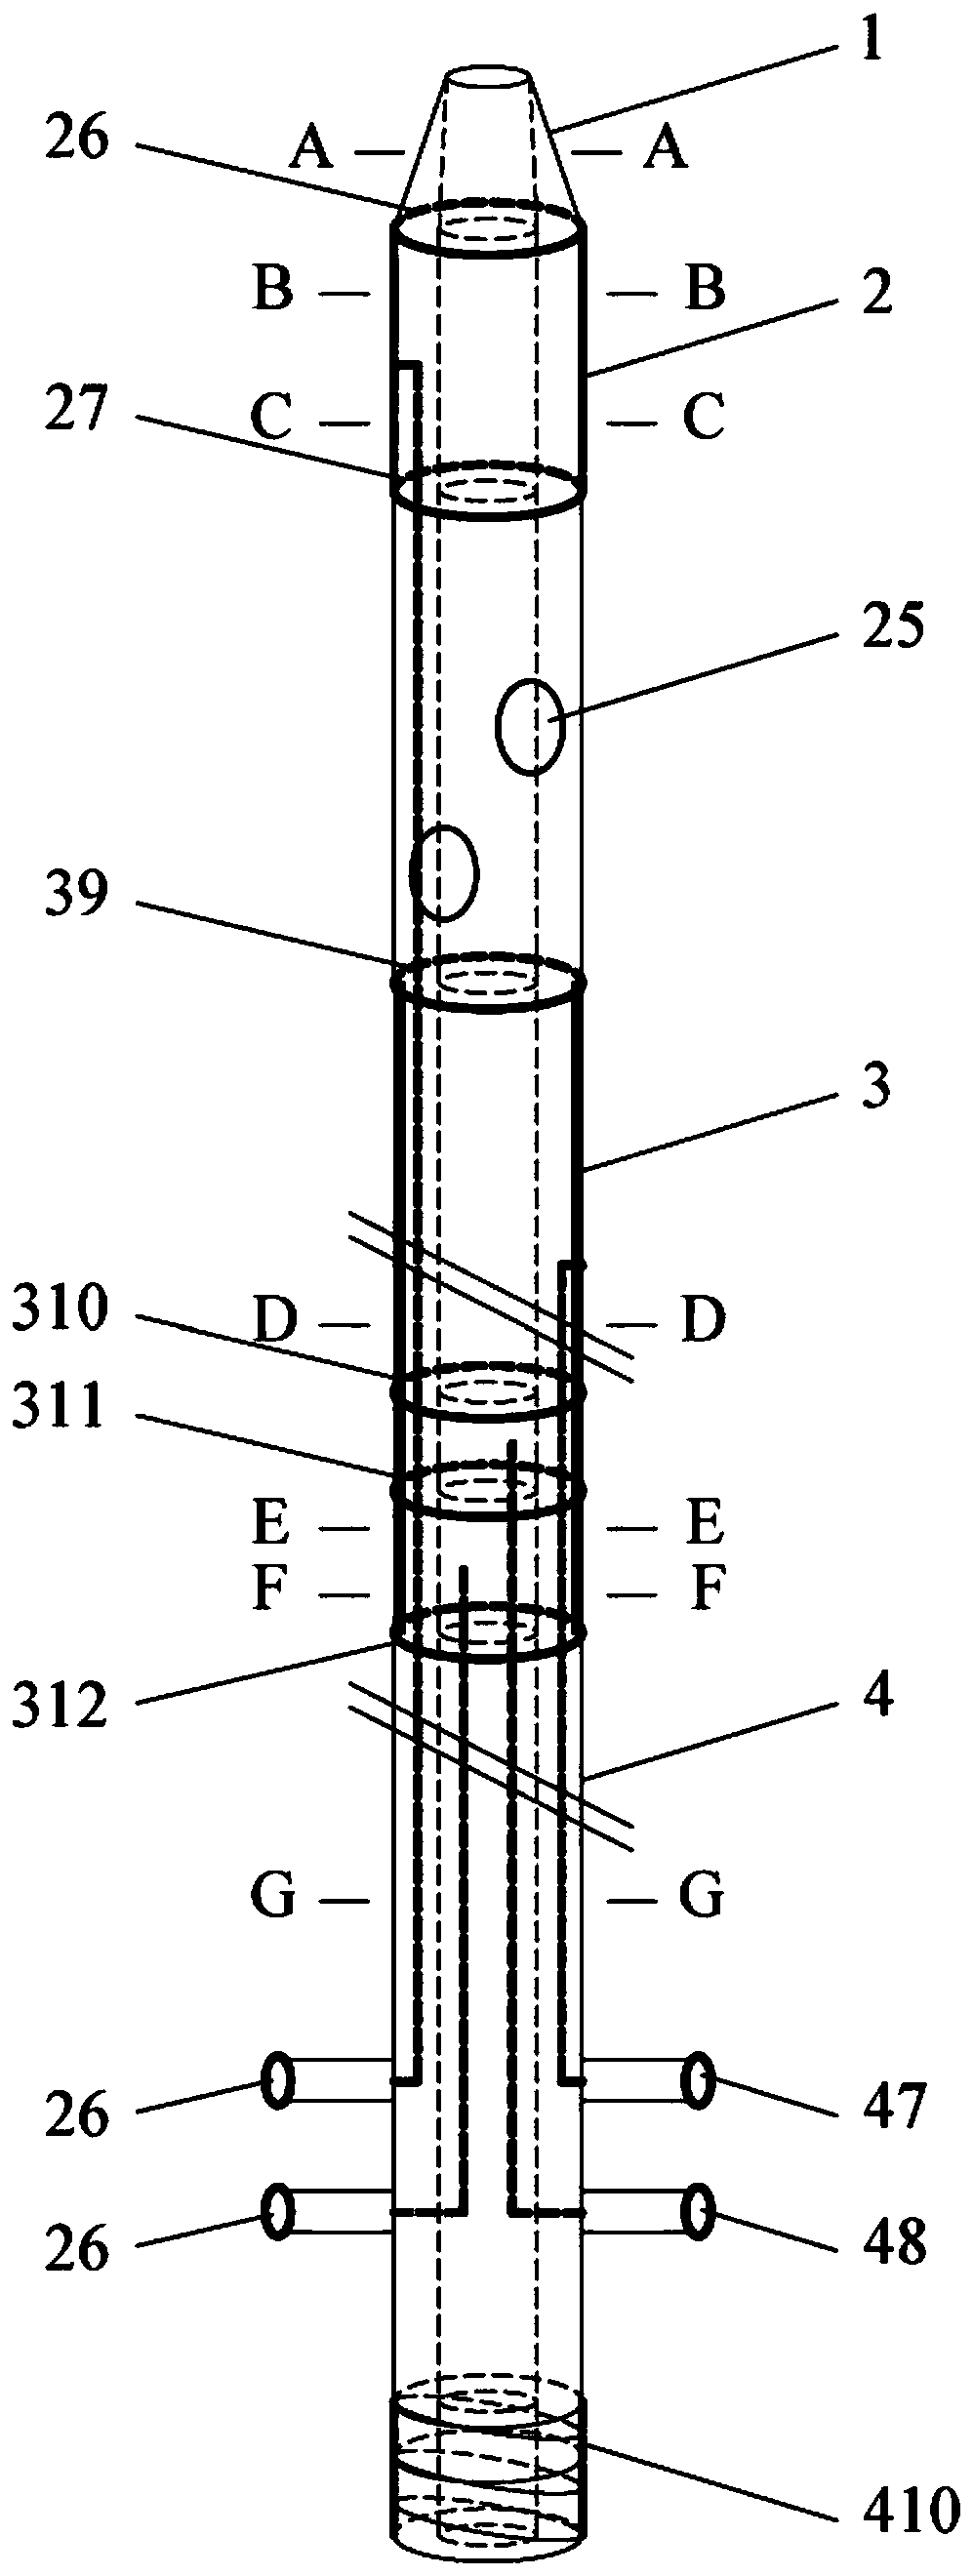 Multistage fistulous tract expanding type puncturing drainage tube having balloon